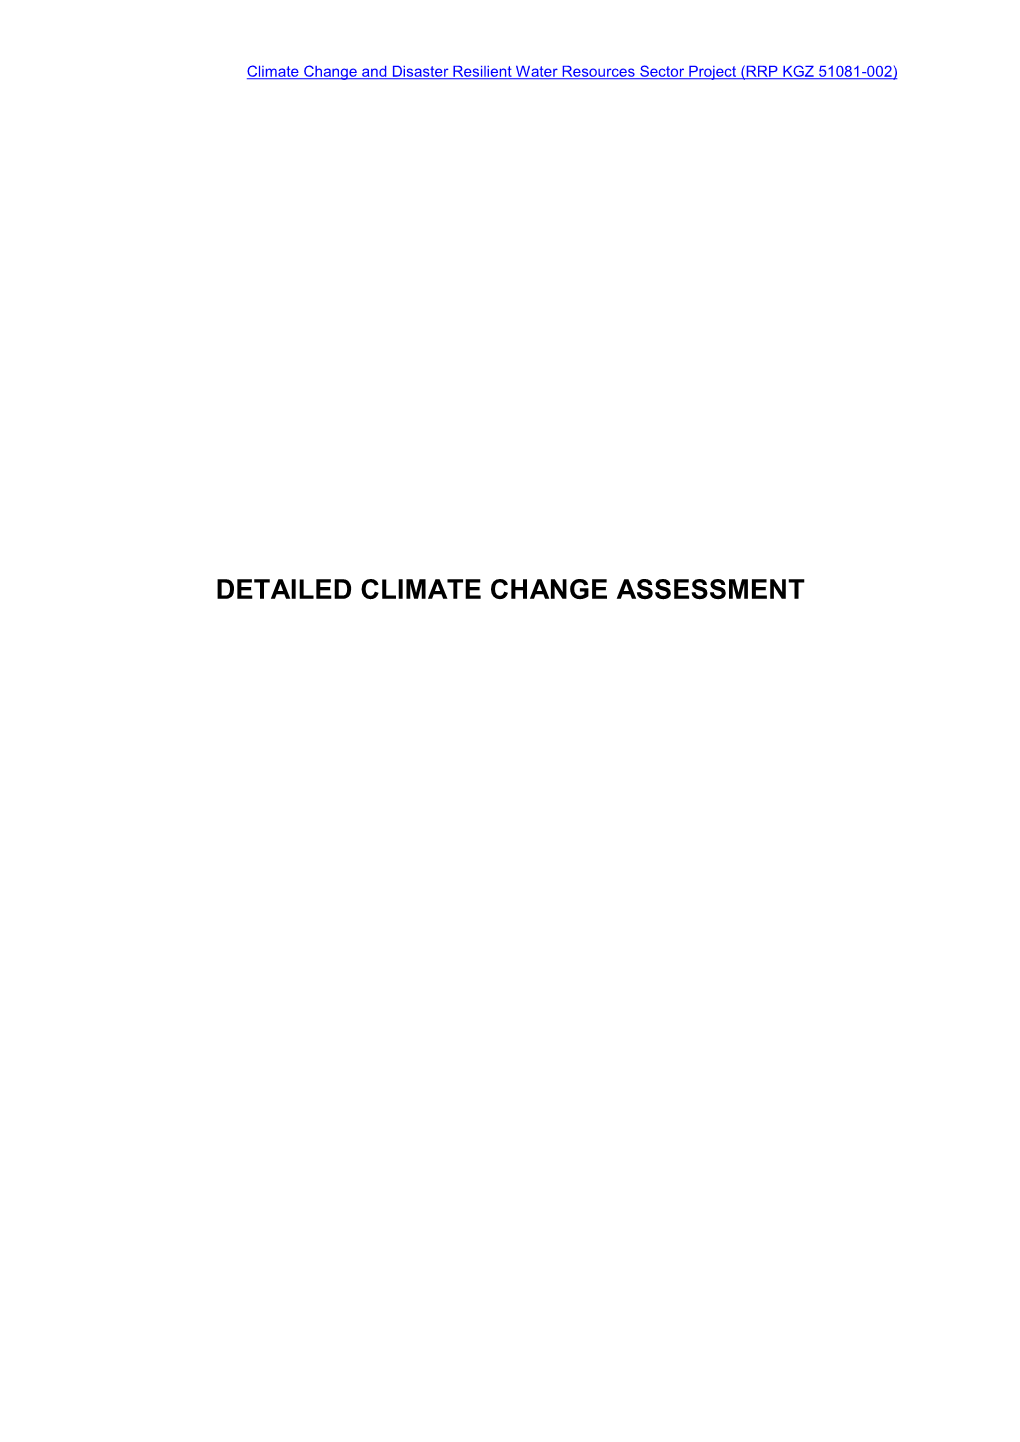 Detailed Climate Change Assessment